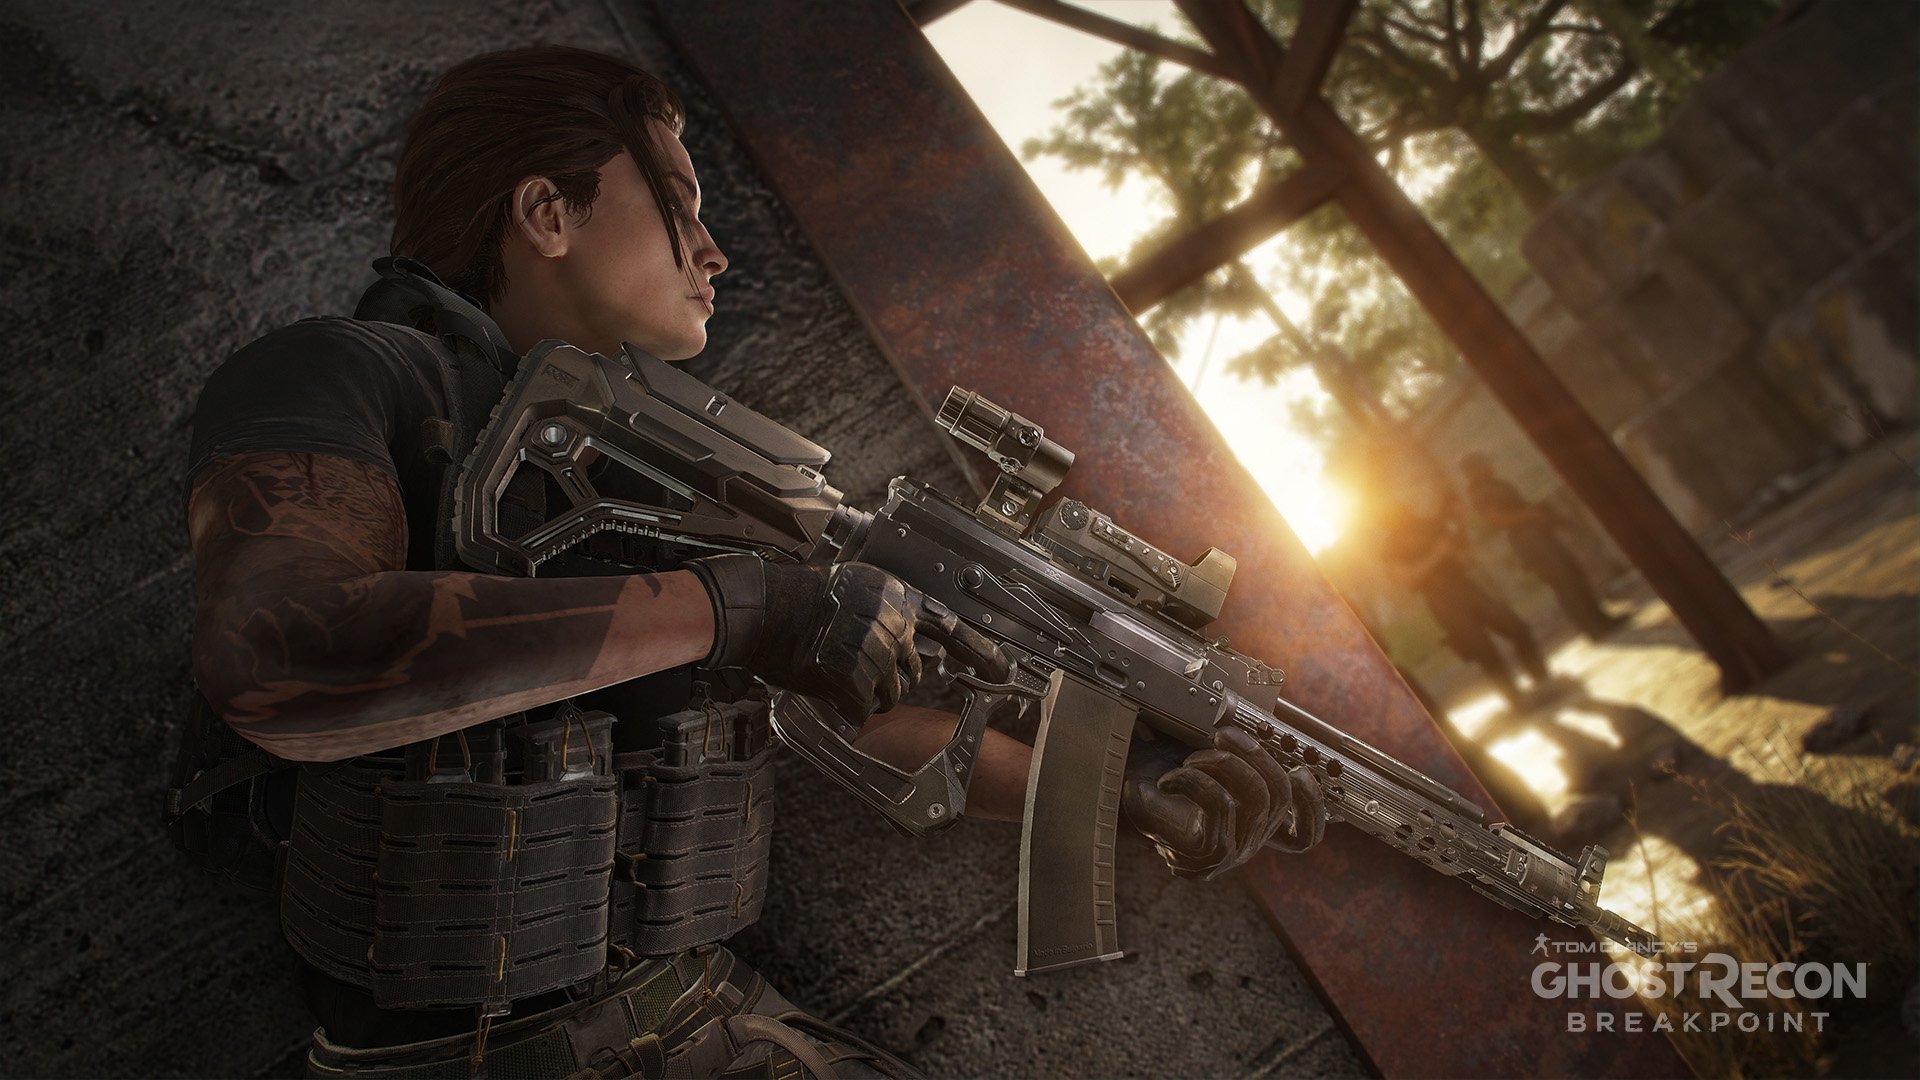 Buka paket Ally Rainbow di Ghost Recon Breakpoint 1